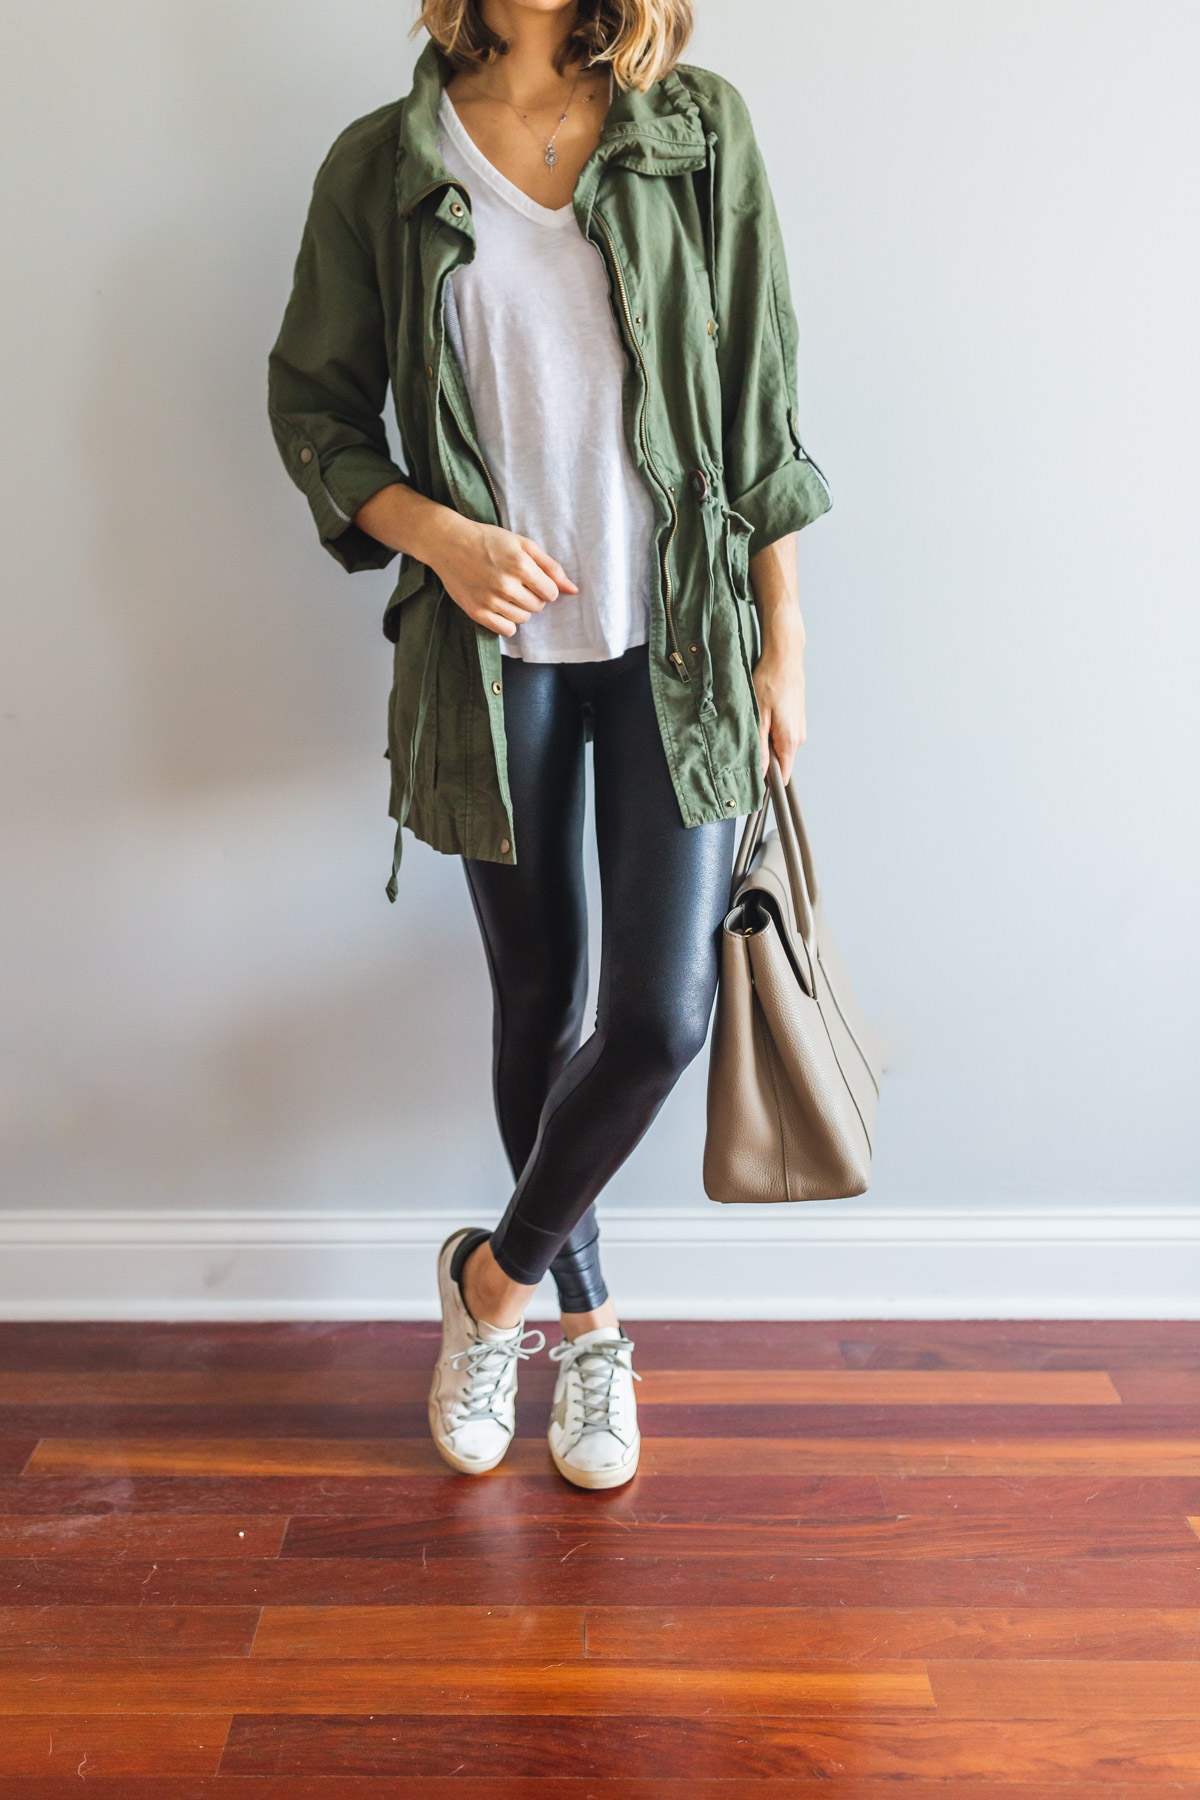 3 Ways To Style the @spanx Faux Patent Leather Leggings